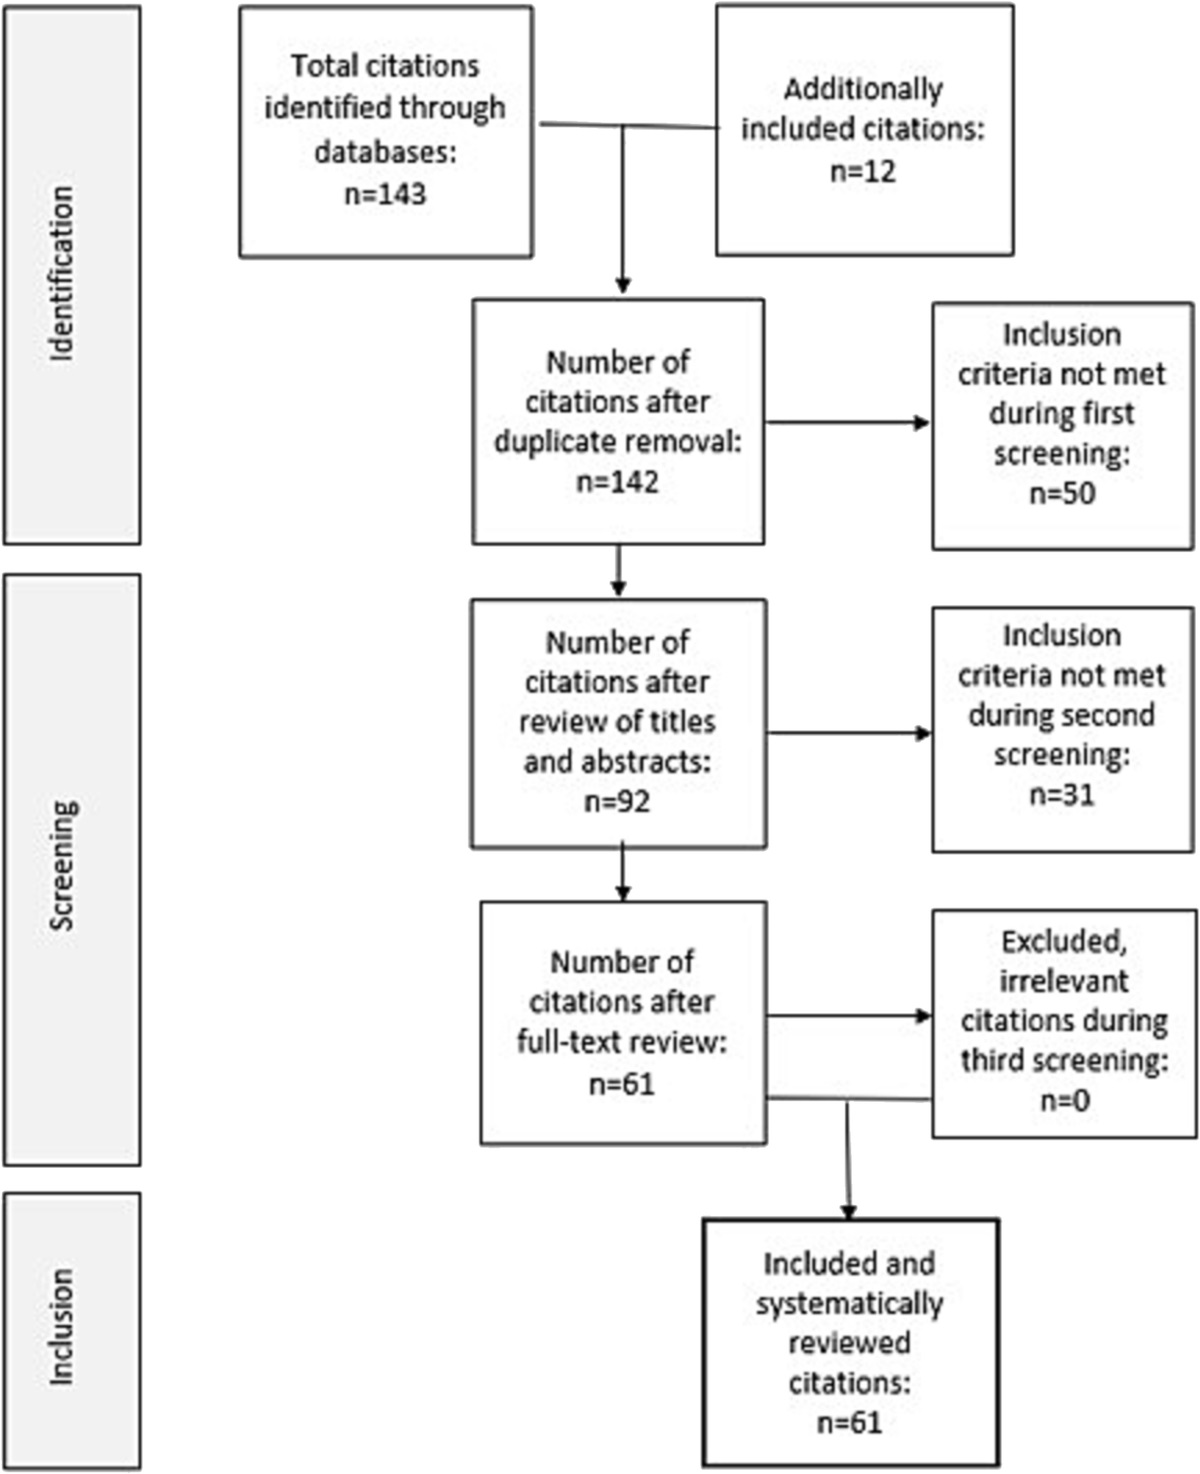 Round-Window Vibroplasty: Systematic Review and Meta-Analysis of Audiological Effectiveness With Different Round-Window Coupling Techniques